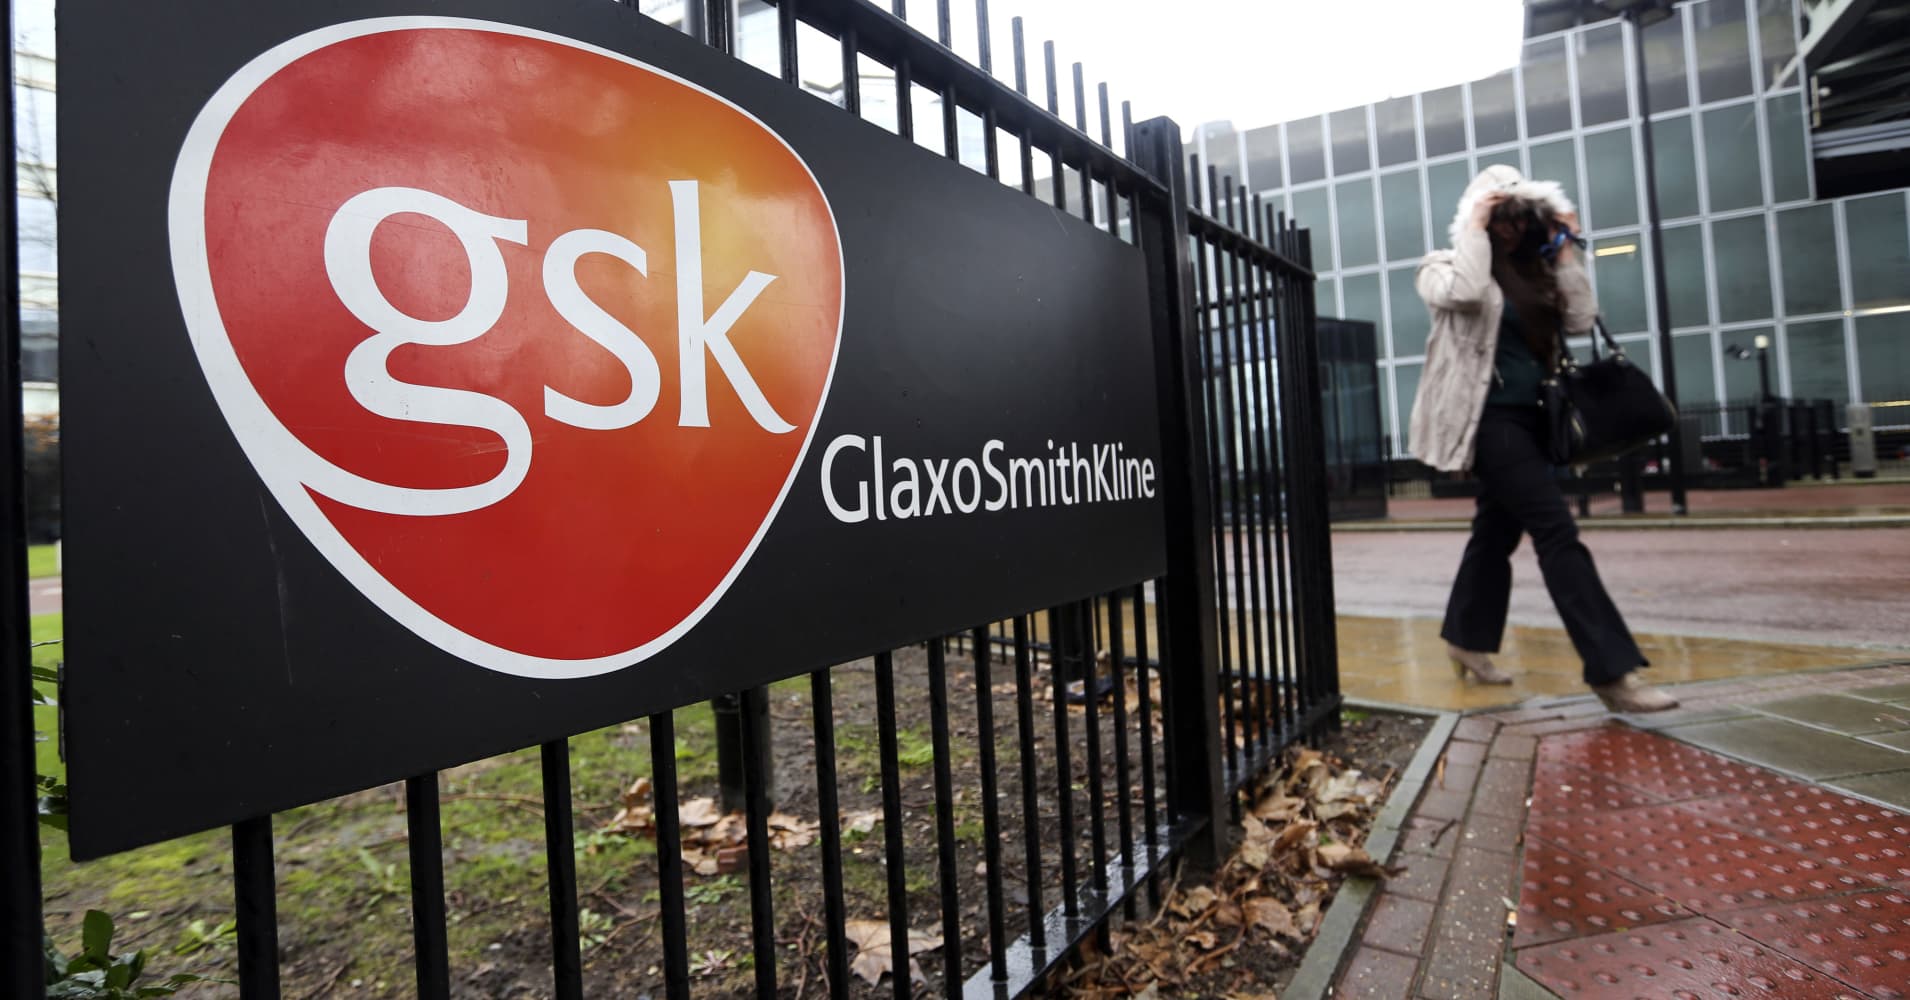 GlaxoSmithKline shares jump after report of possible break-up